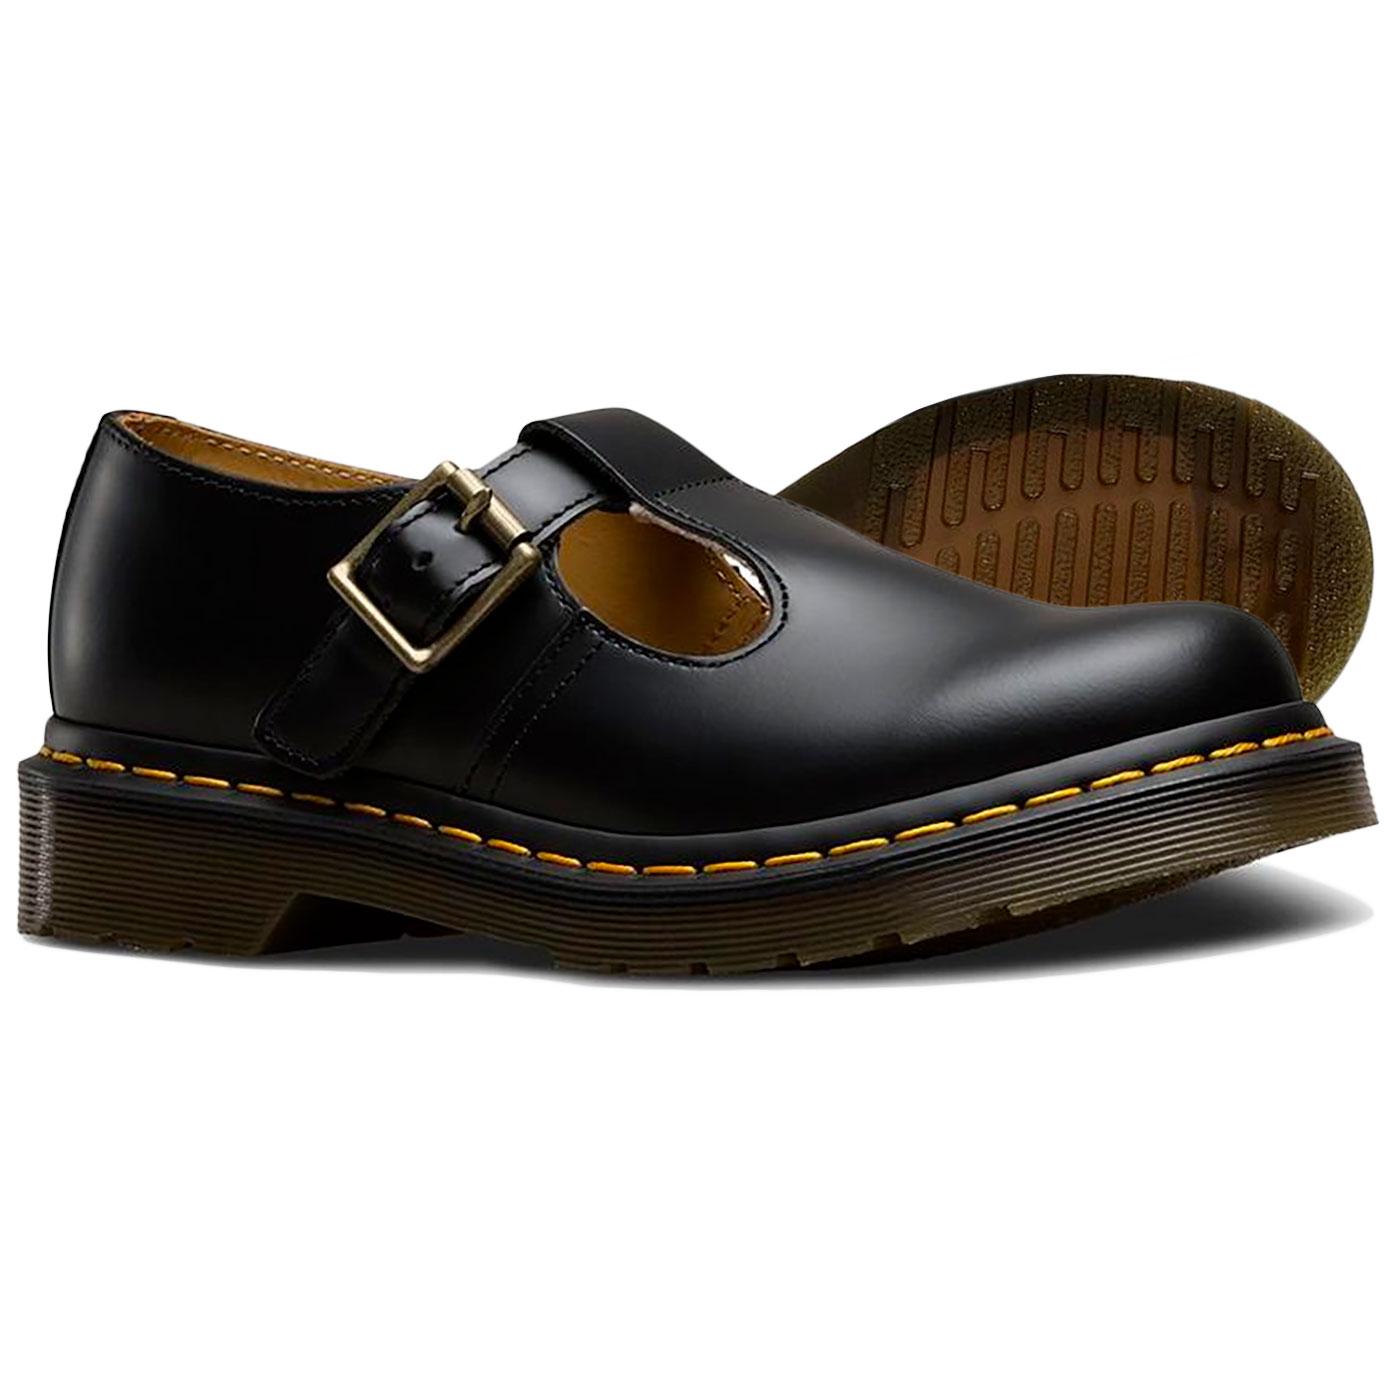 dr martens polley t bar shoes